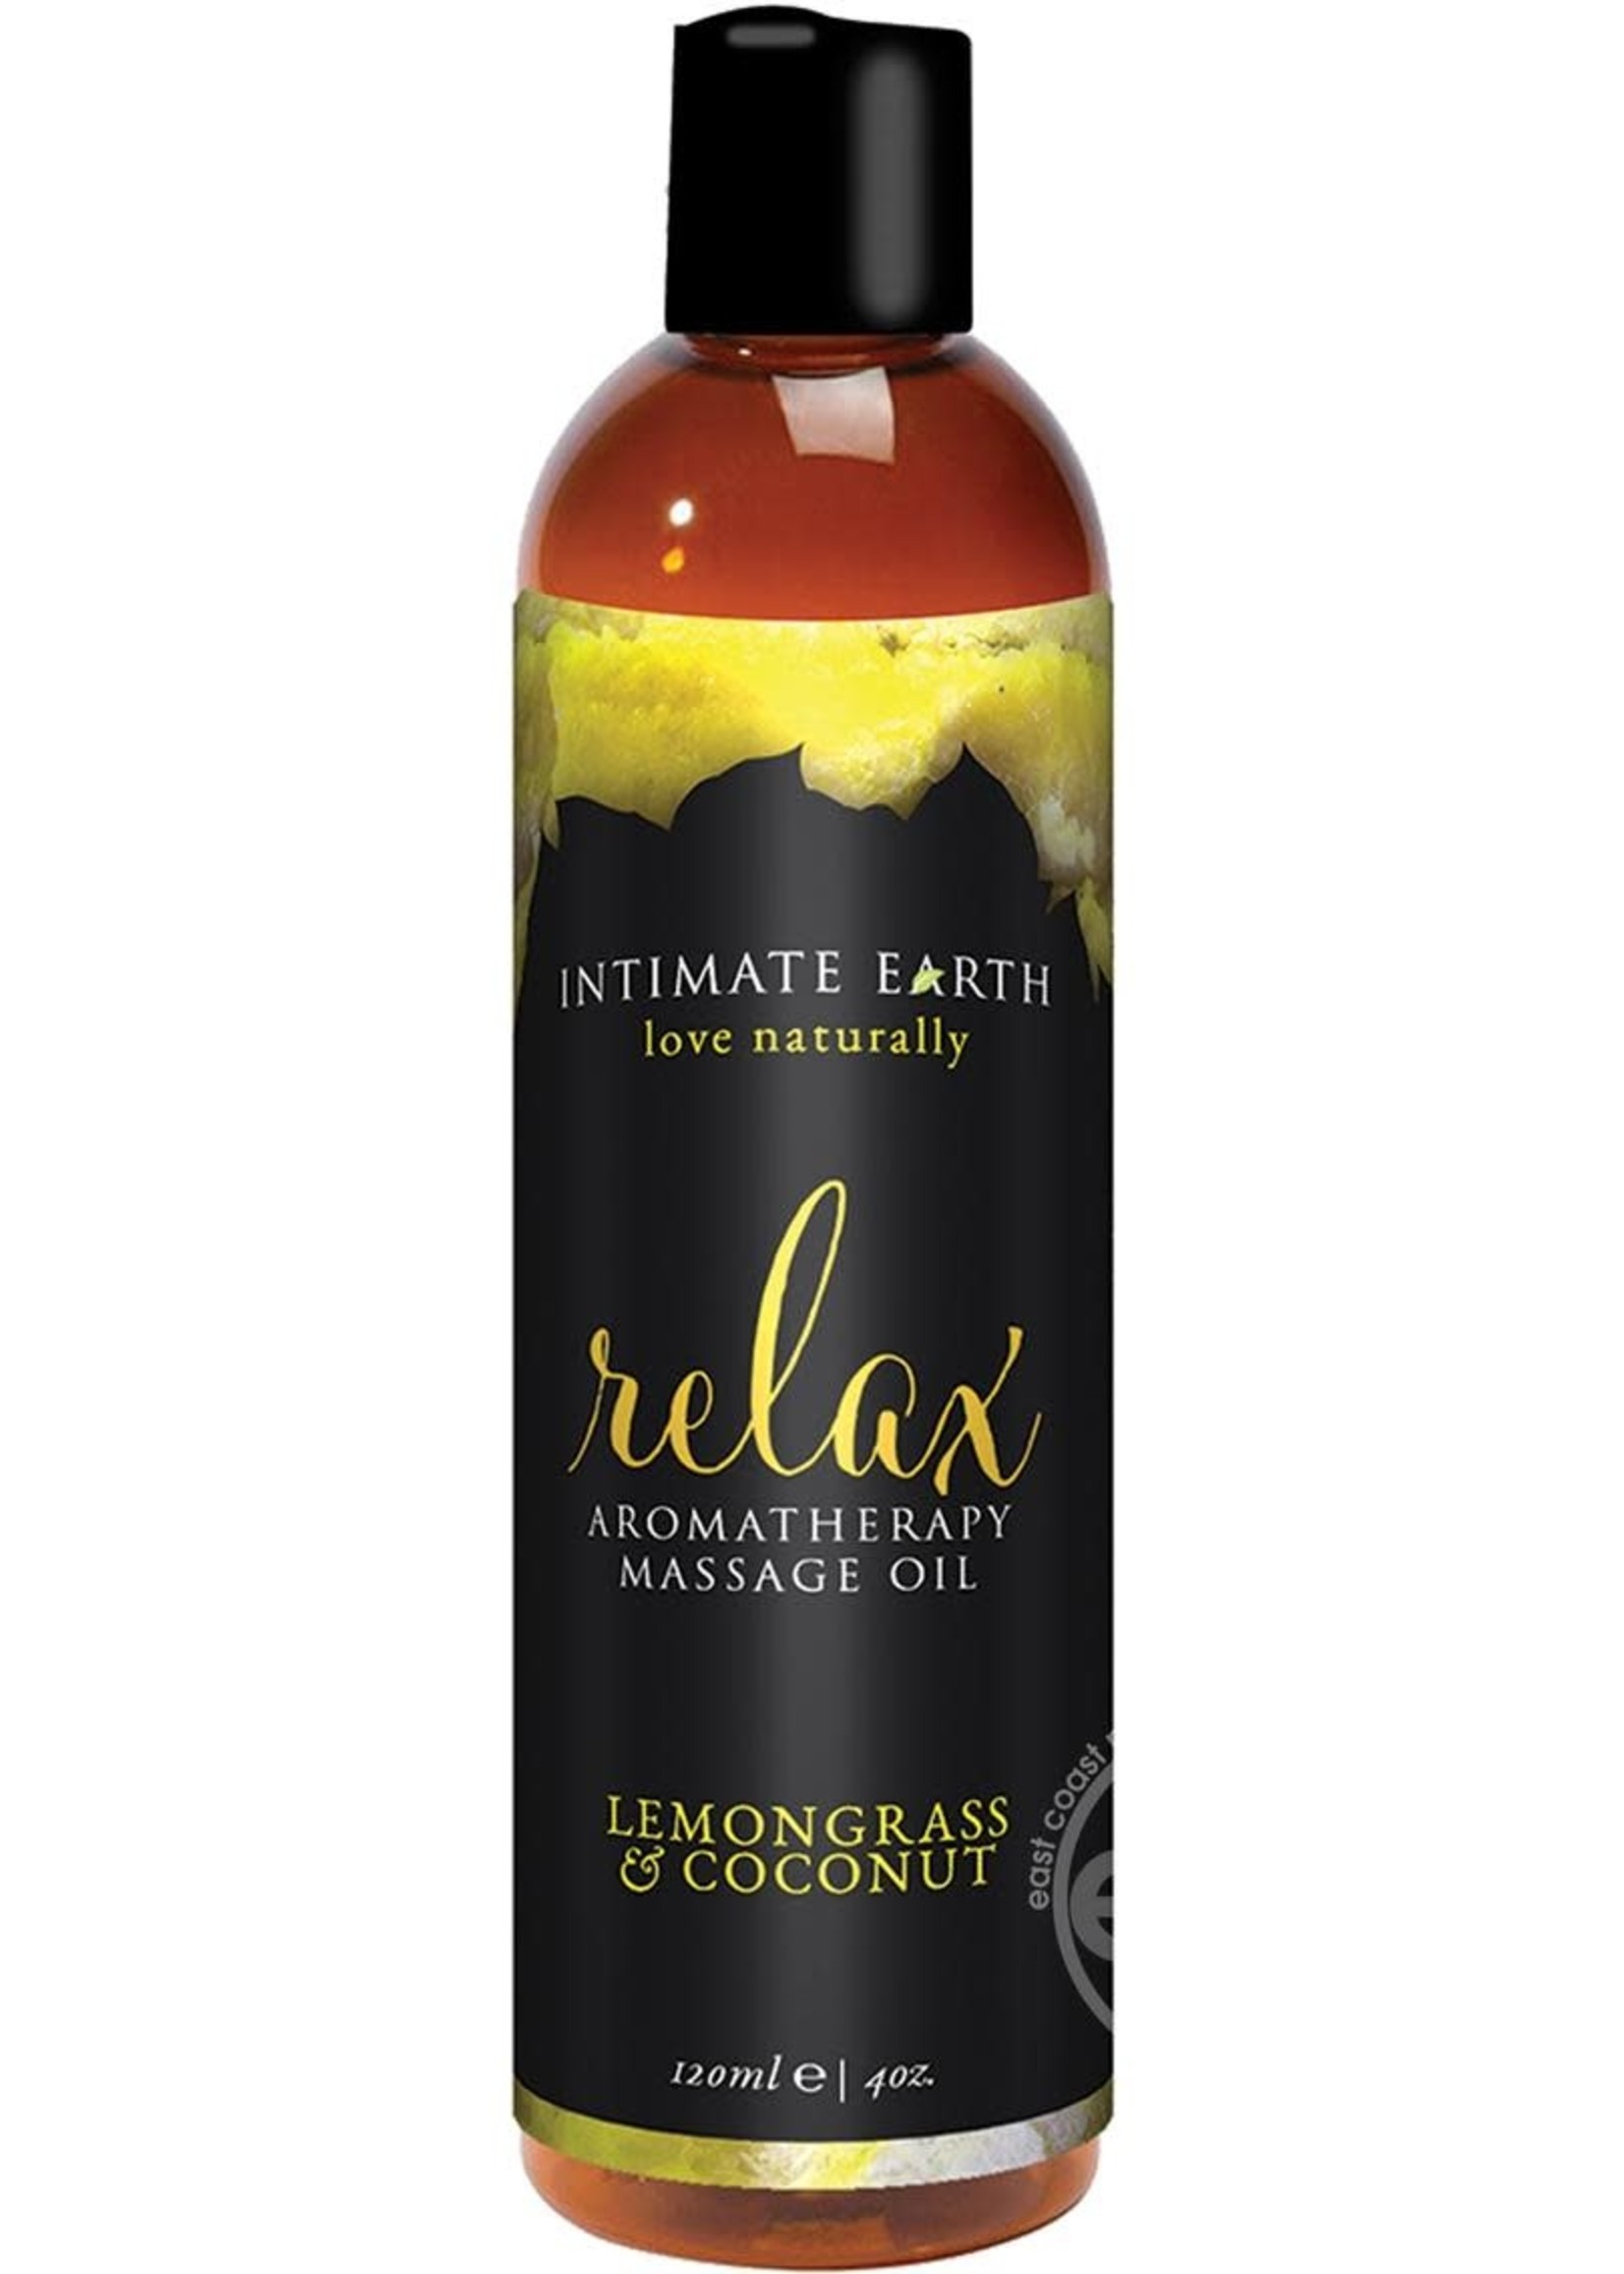 Intimate Earth Intimate Earth Relax Aromatherapy Massage Oil Lemongrass & Coconut 4oz